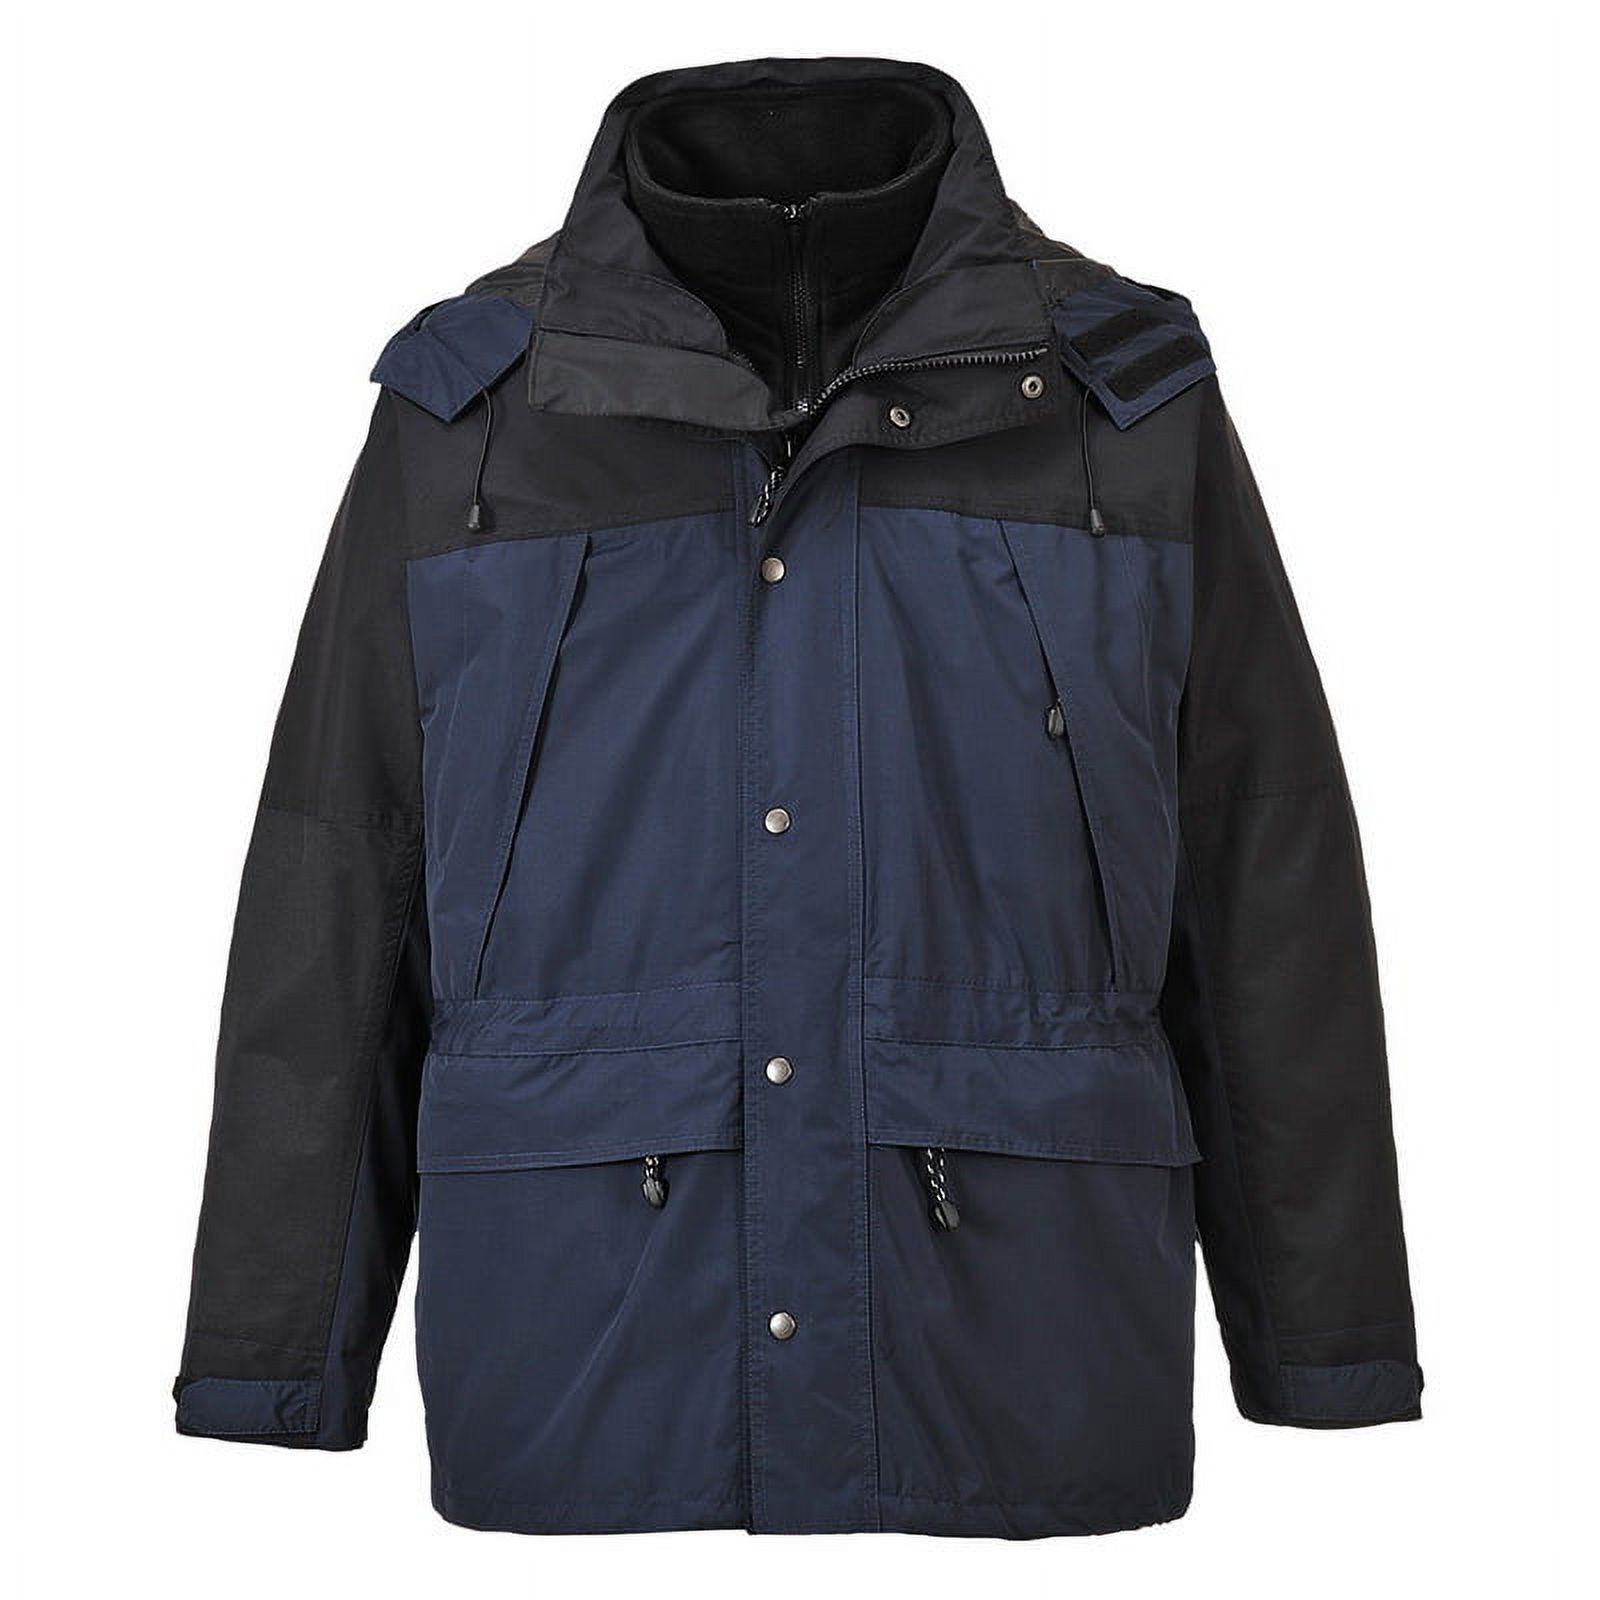 Portwest S532 Orkney 3 in 1 Waterproof Breathable All Weather Jacket Gray, X-Large - image 3 of 3